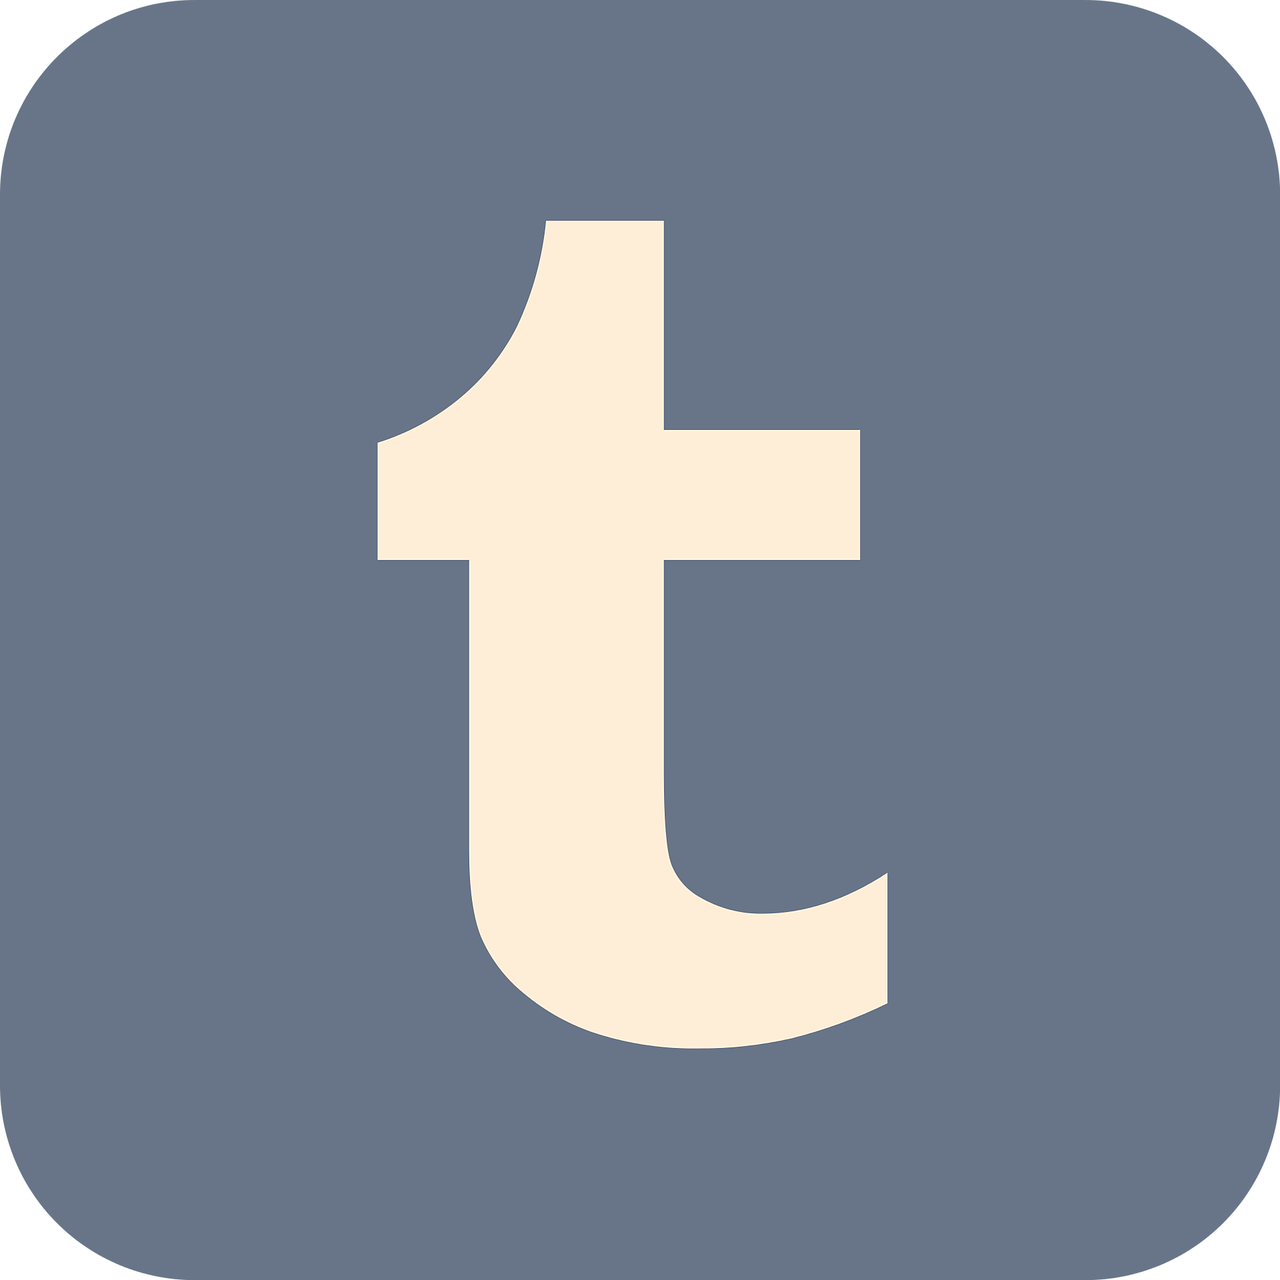 a blue square with a white t on it, featured on tumblr, tachisme, logo for a social network, tomba, sepia tone, flat icon